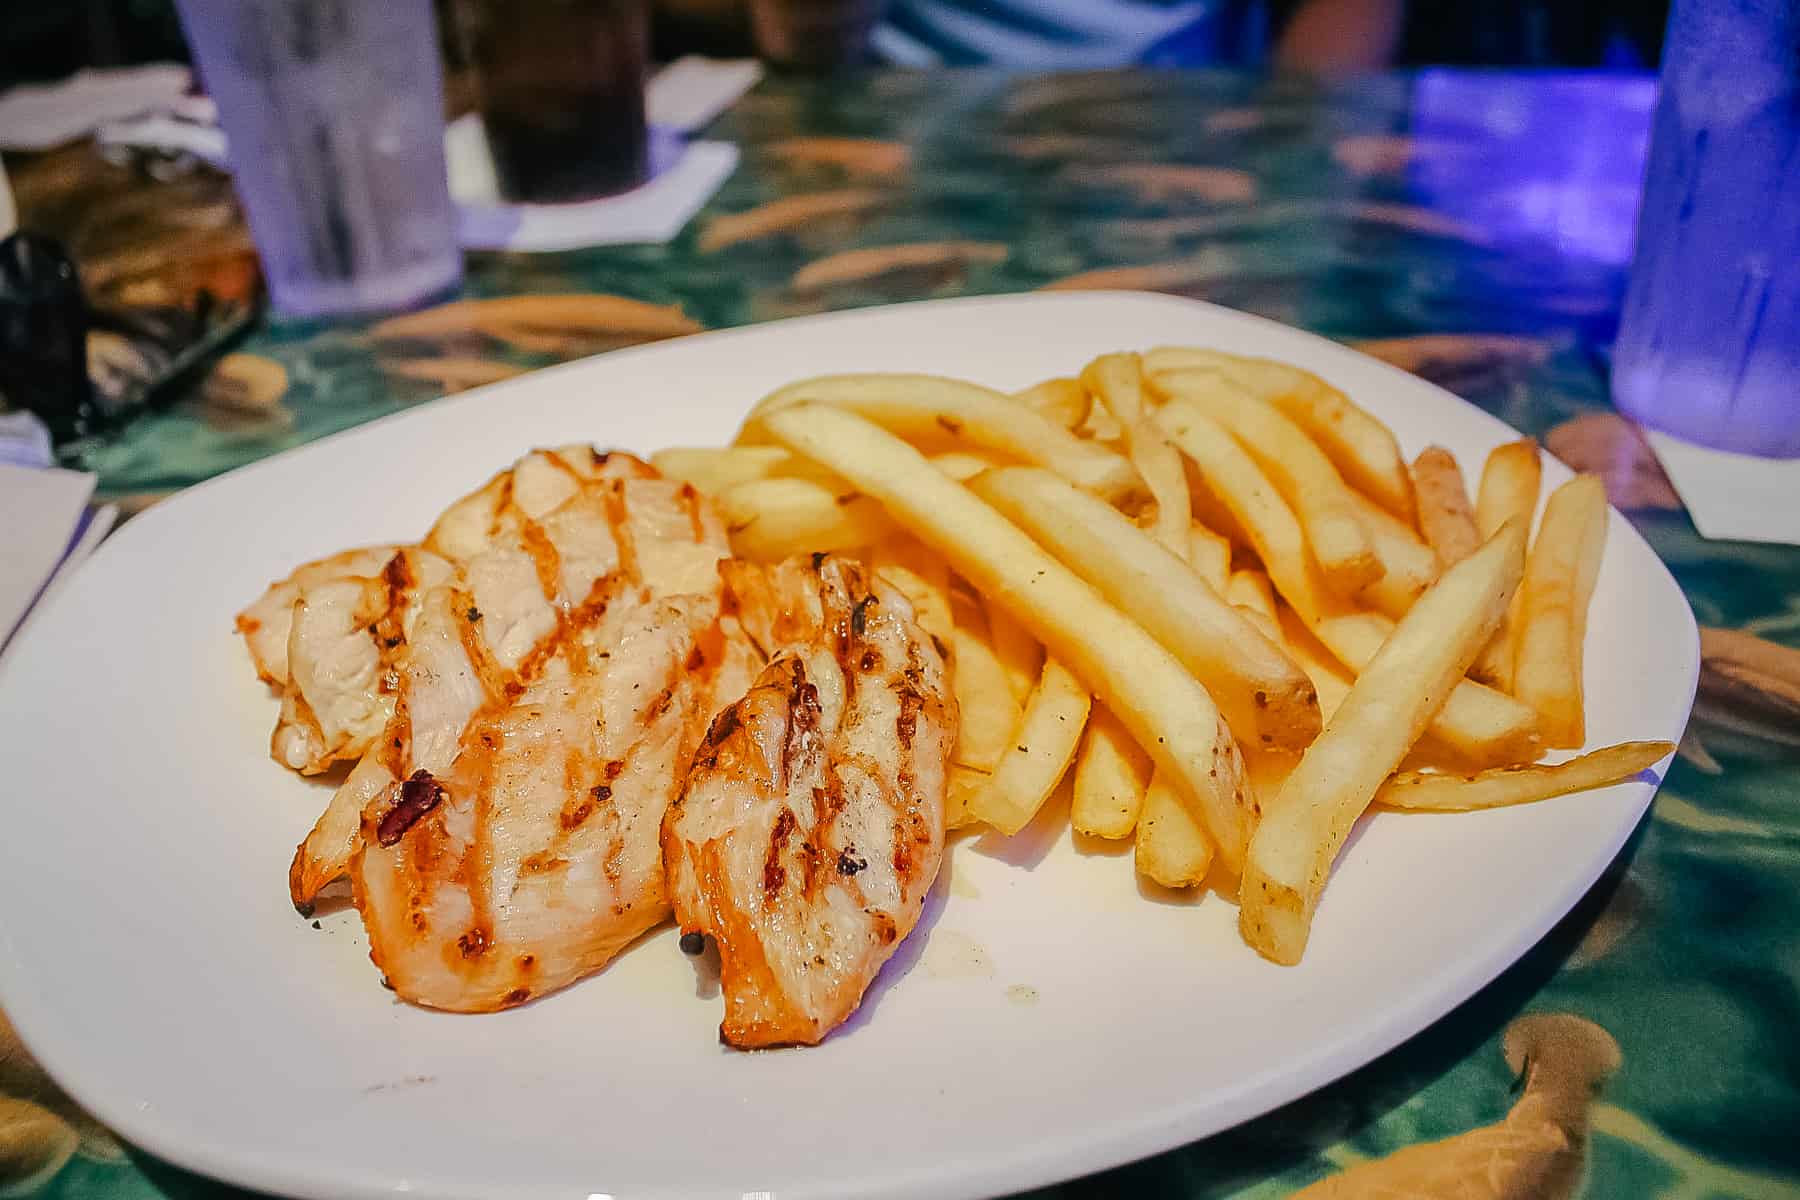 An allergy friendly meal of grilled chicken fingers with fries prepared by a chef at Rainforest Cafe at Disney Springs. 